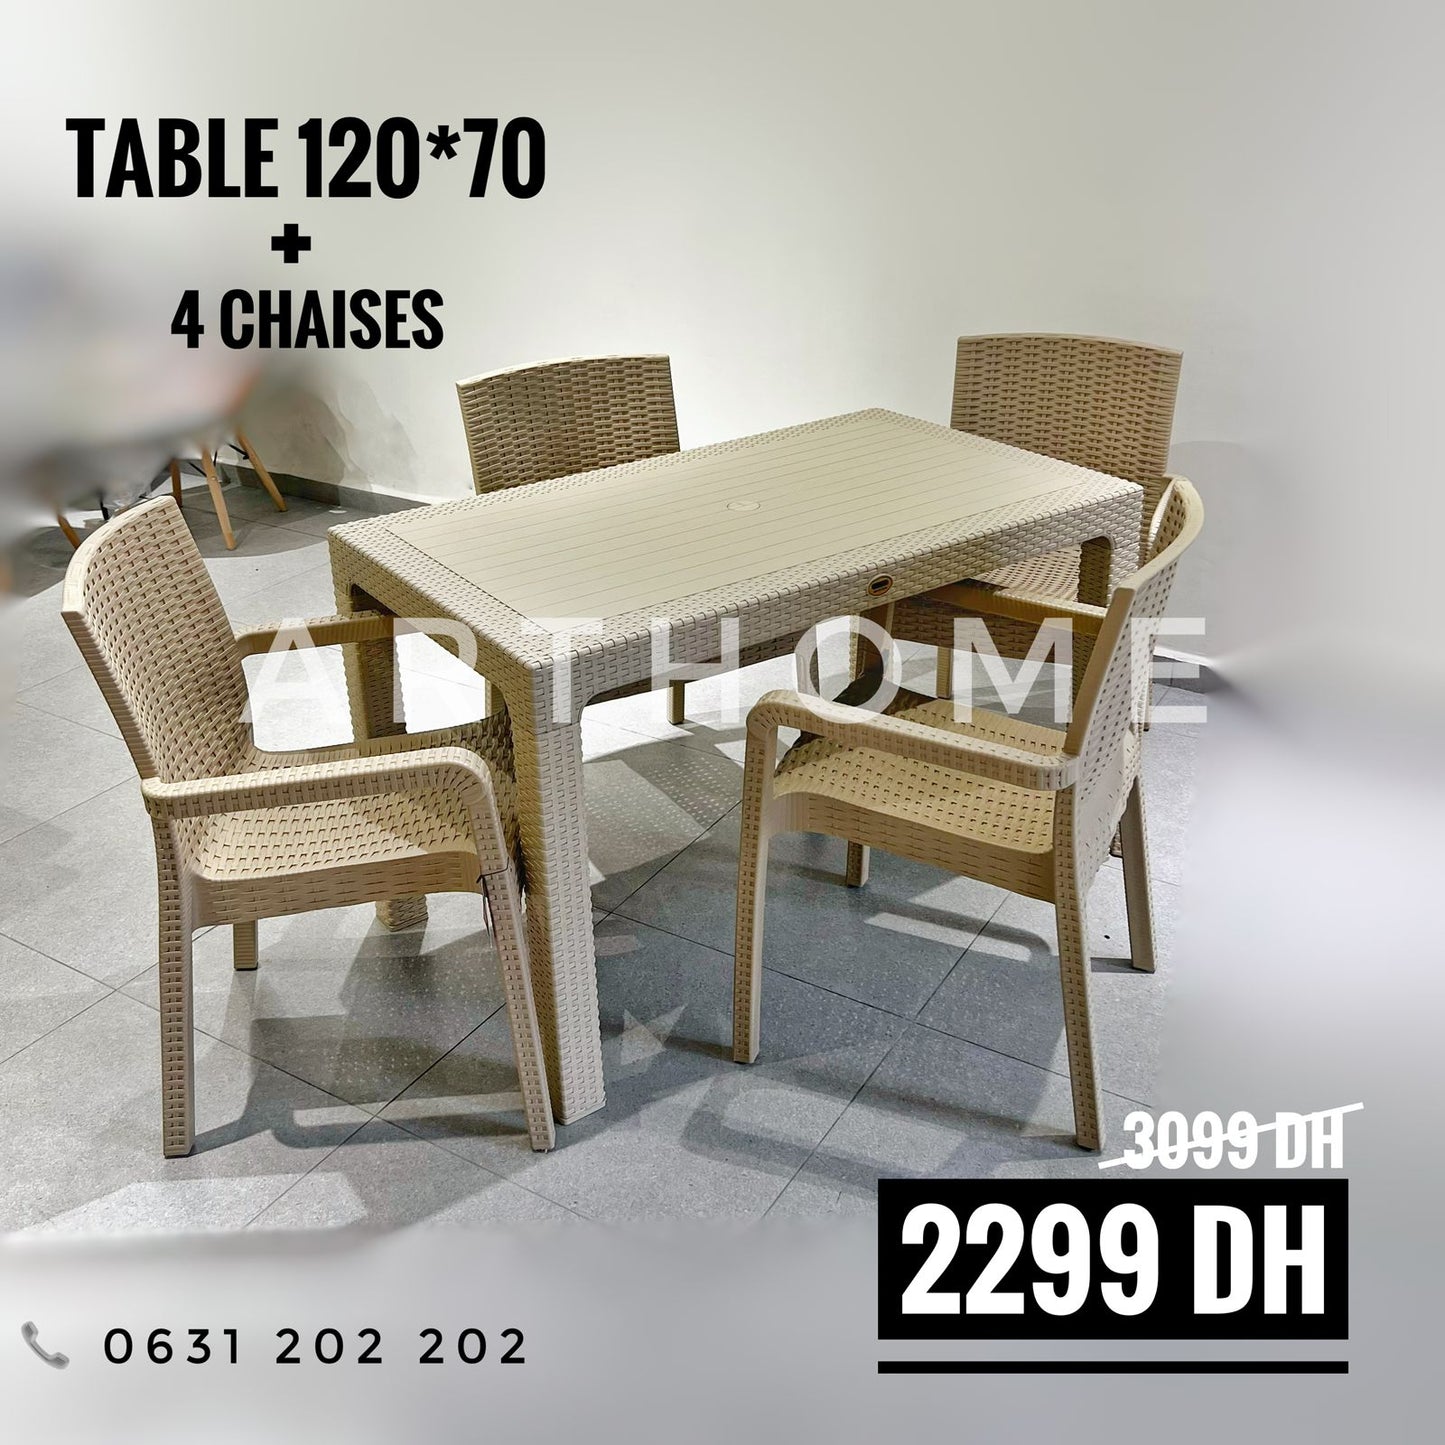 TABLE ROME 4 CHAISES